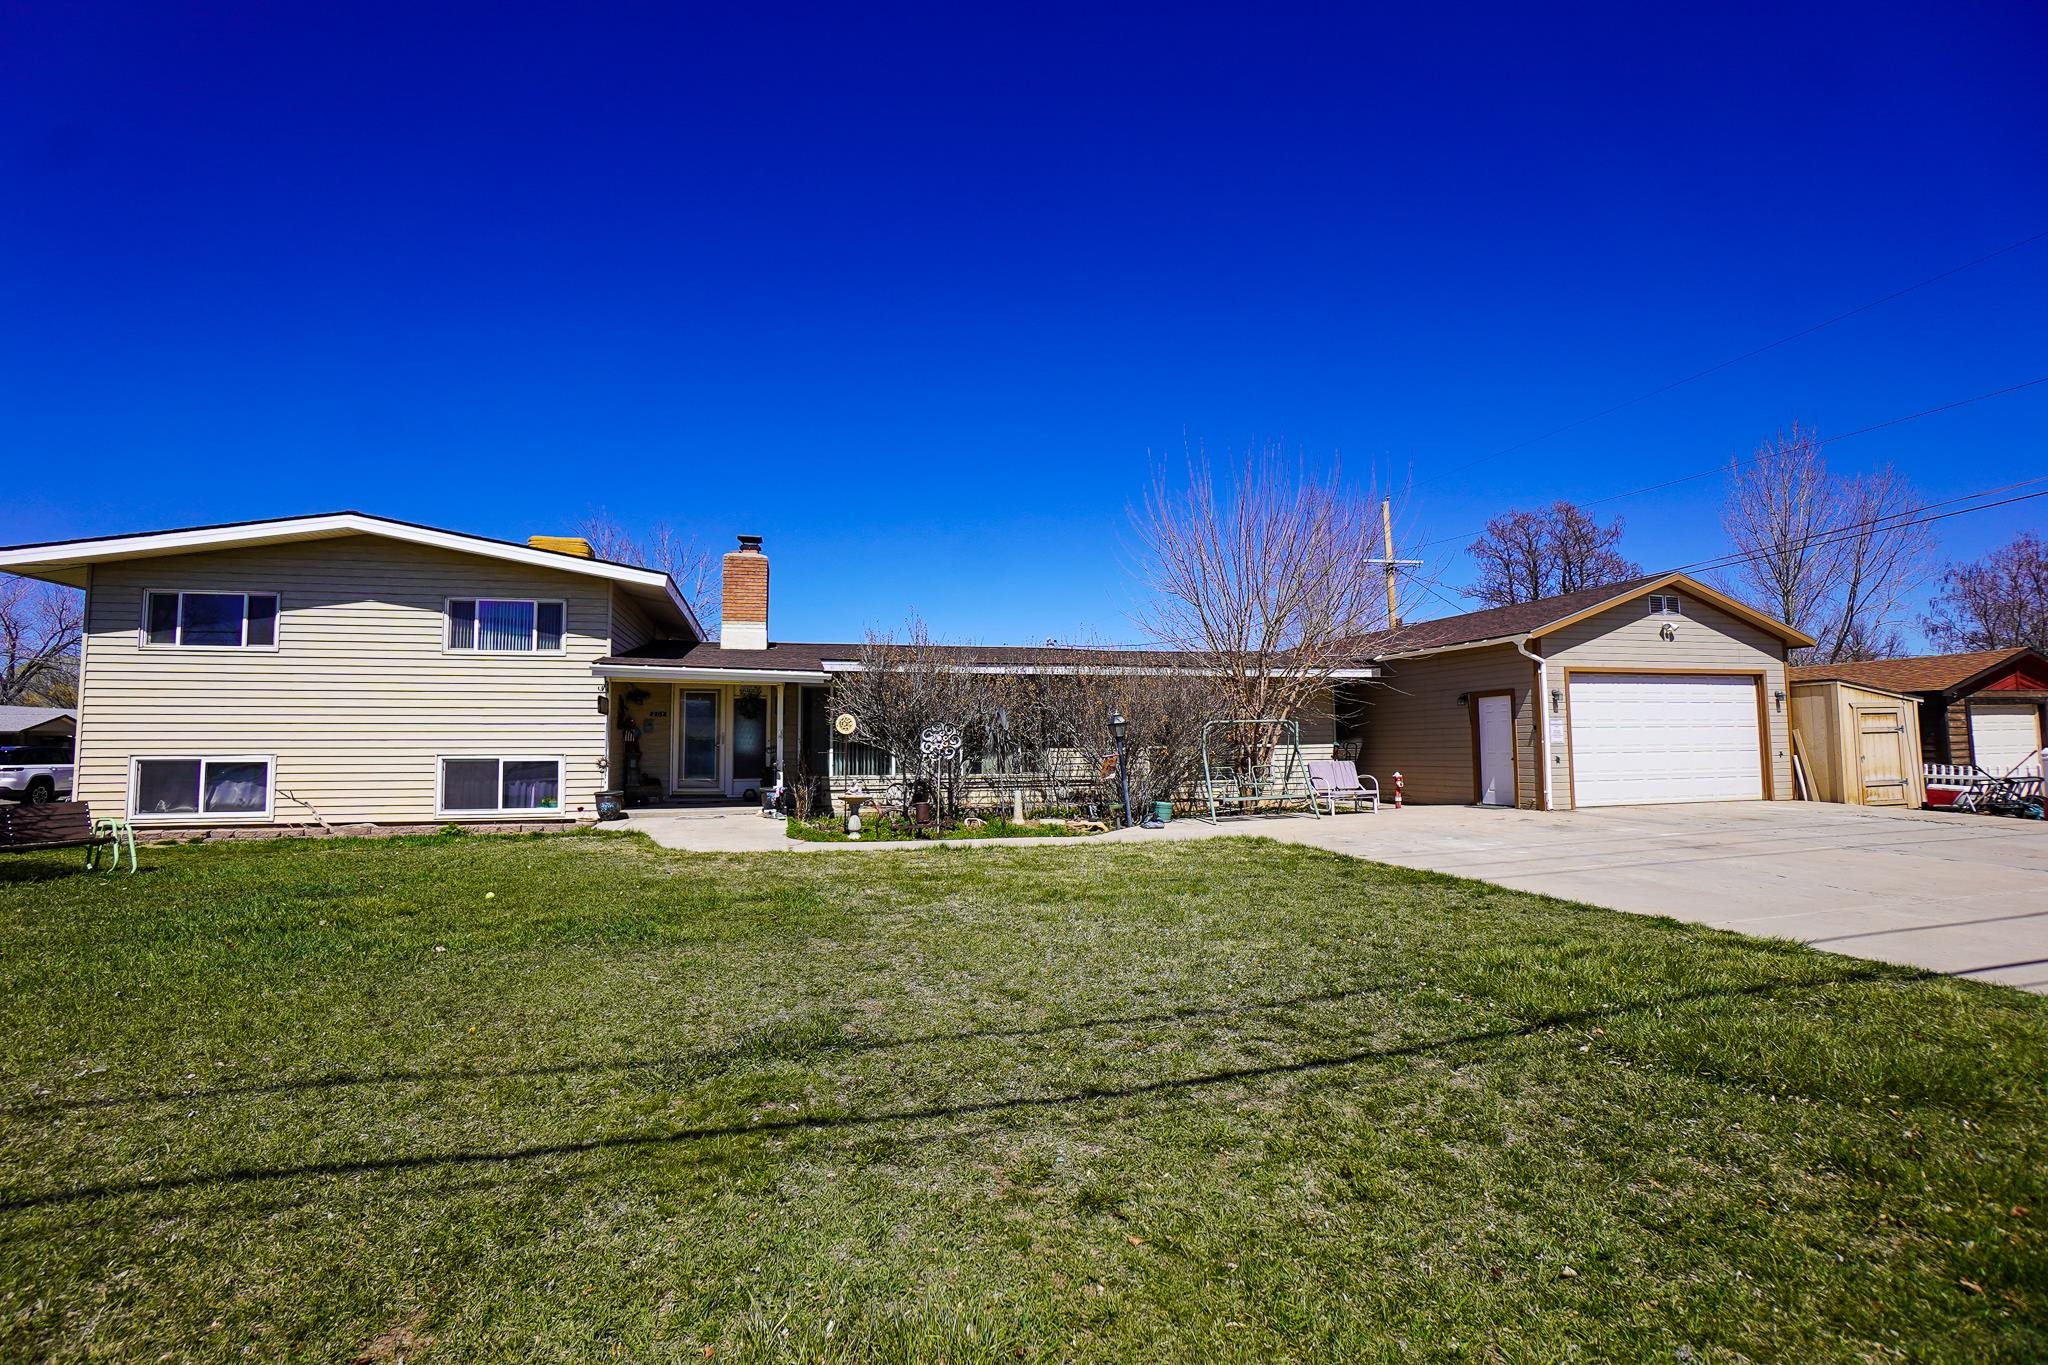 Welcome to Fruita! This home has so much to offer, the possibilities are endless. Less than a 10-minute walk to downtown Fruita. Room for everyone in this beautiful home. Enjoy your summer evenings in your huge backyard with a swimming pool and room to run and play. Amazing views of the Monument from the front yard. Did I mention NO HOA. Oversized 2 car garage/shop with 220. Plenty of storage for all your stuff. Come check it out before it's gone.